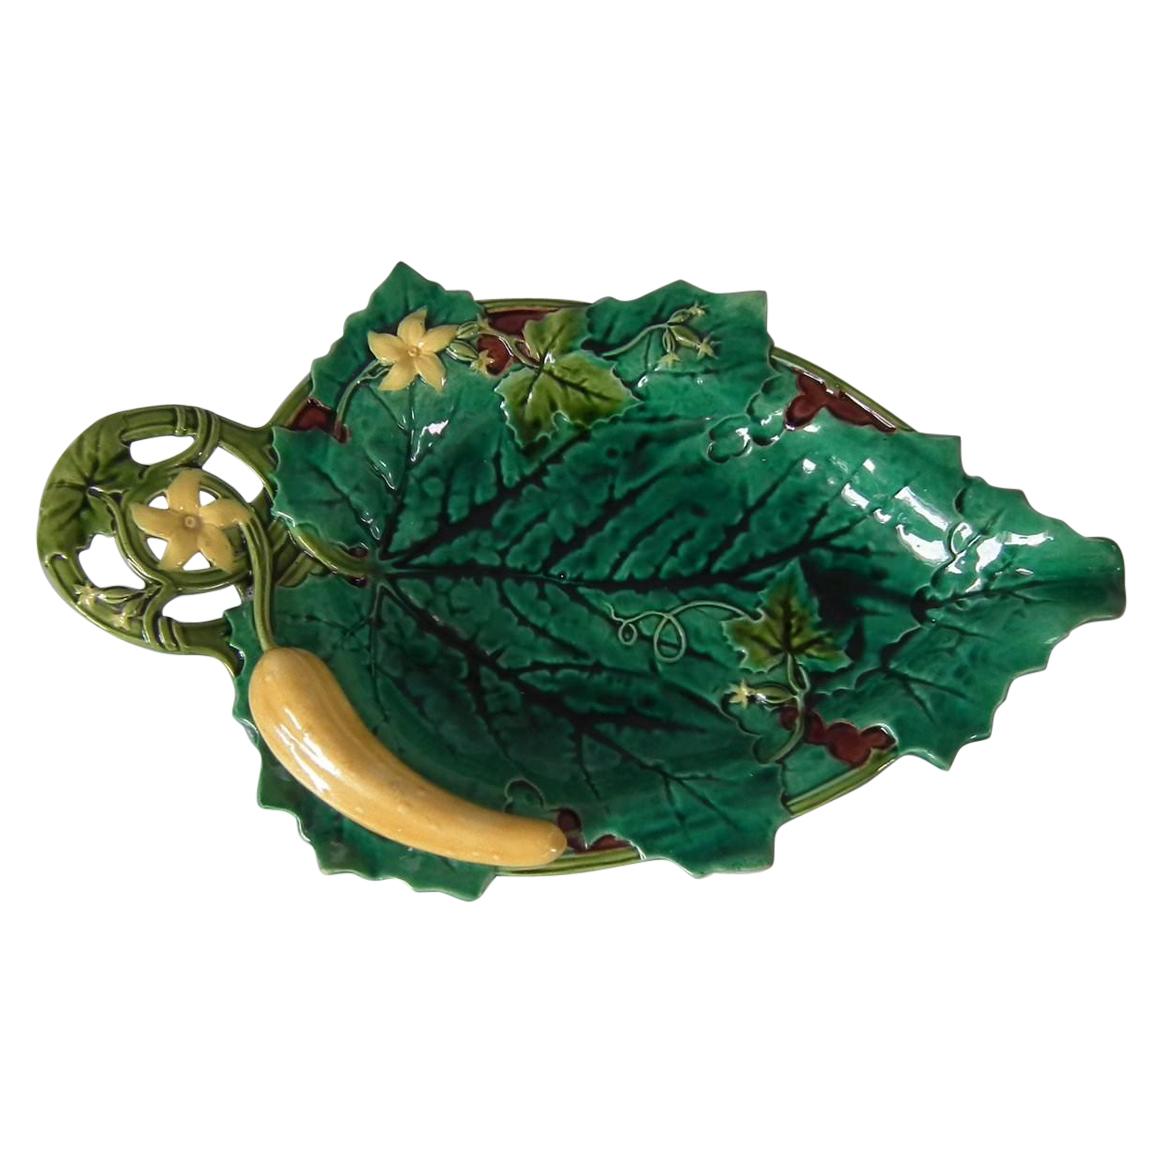 Minton Majolica Cucumber and Leaf Tray